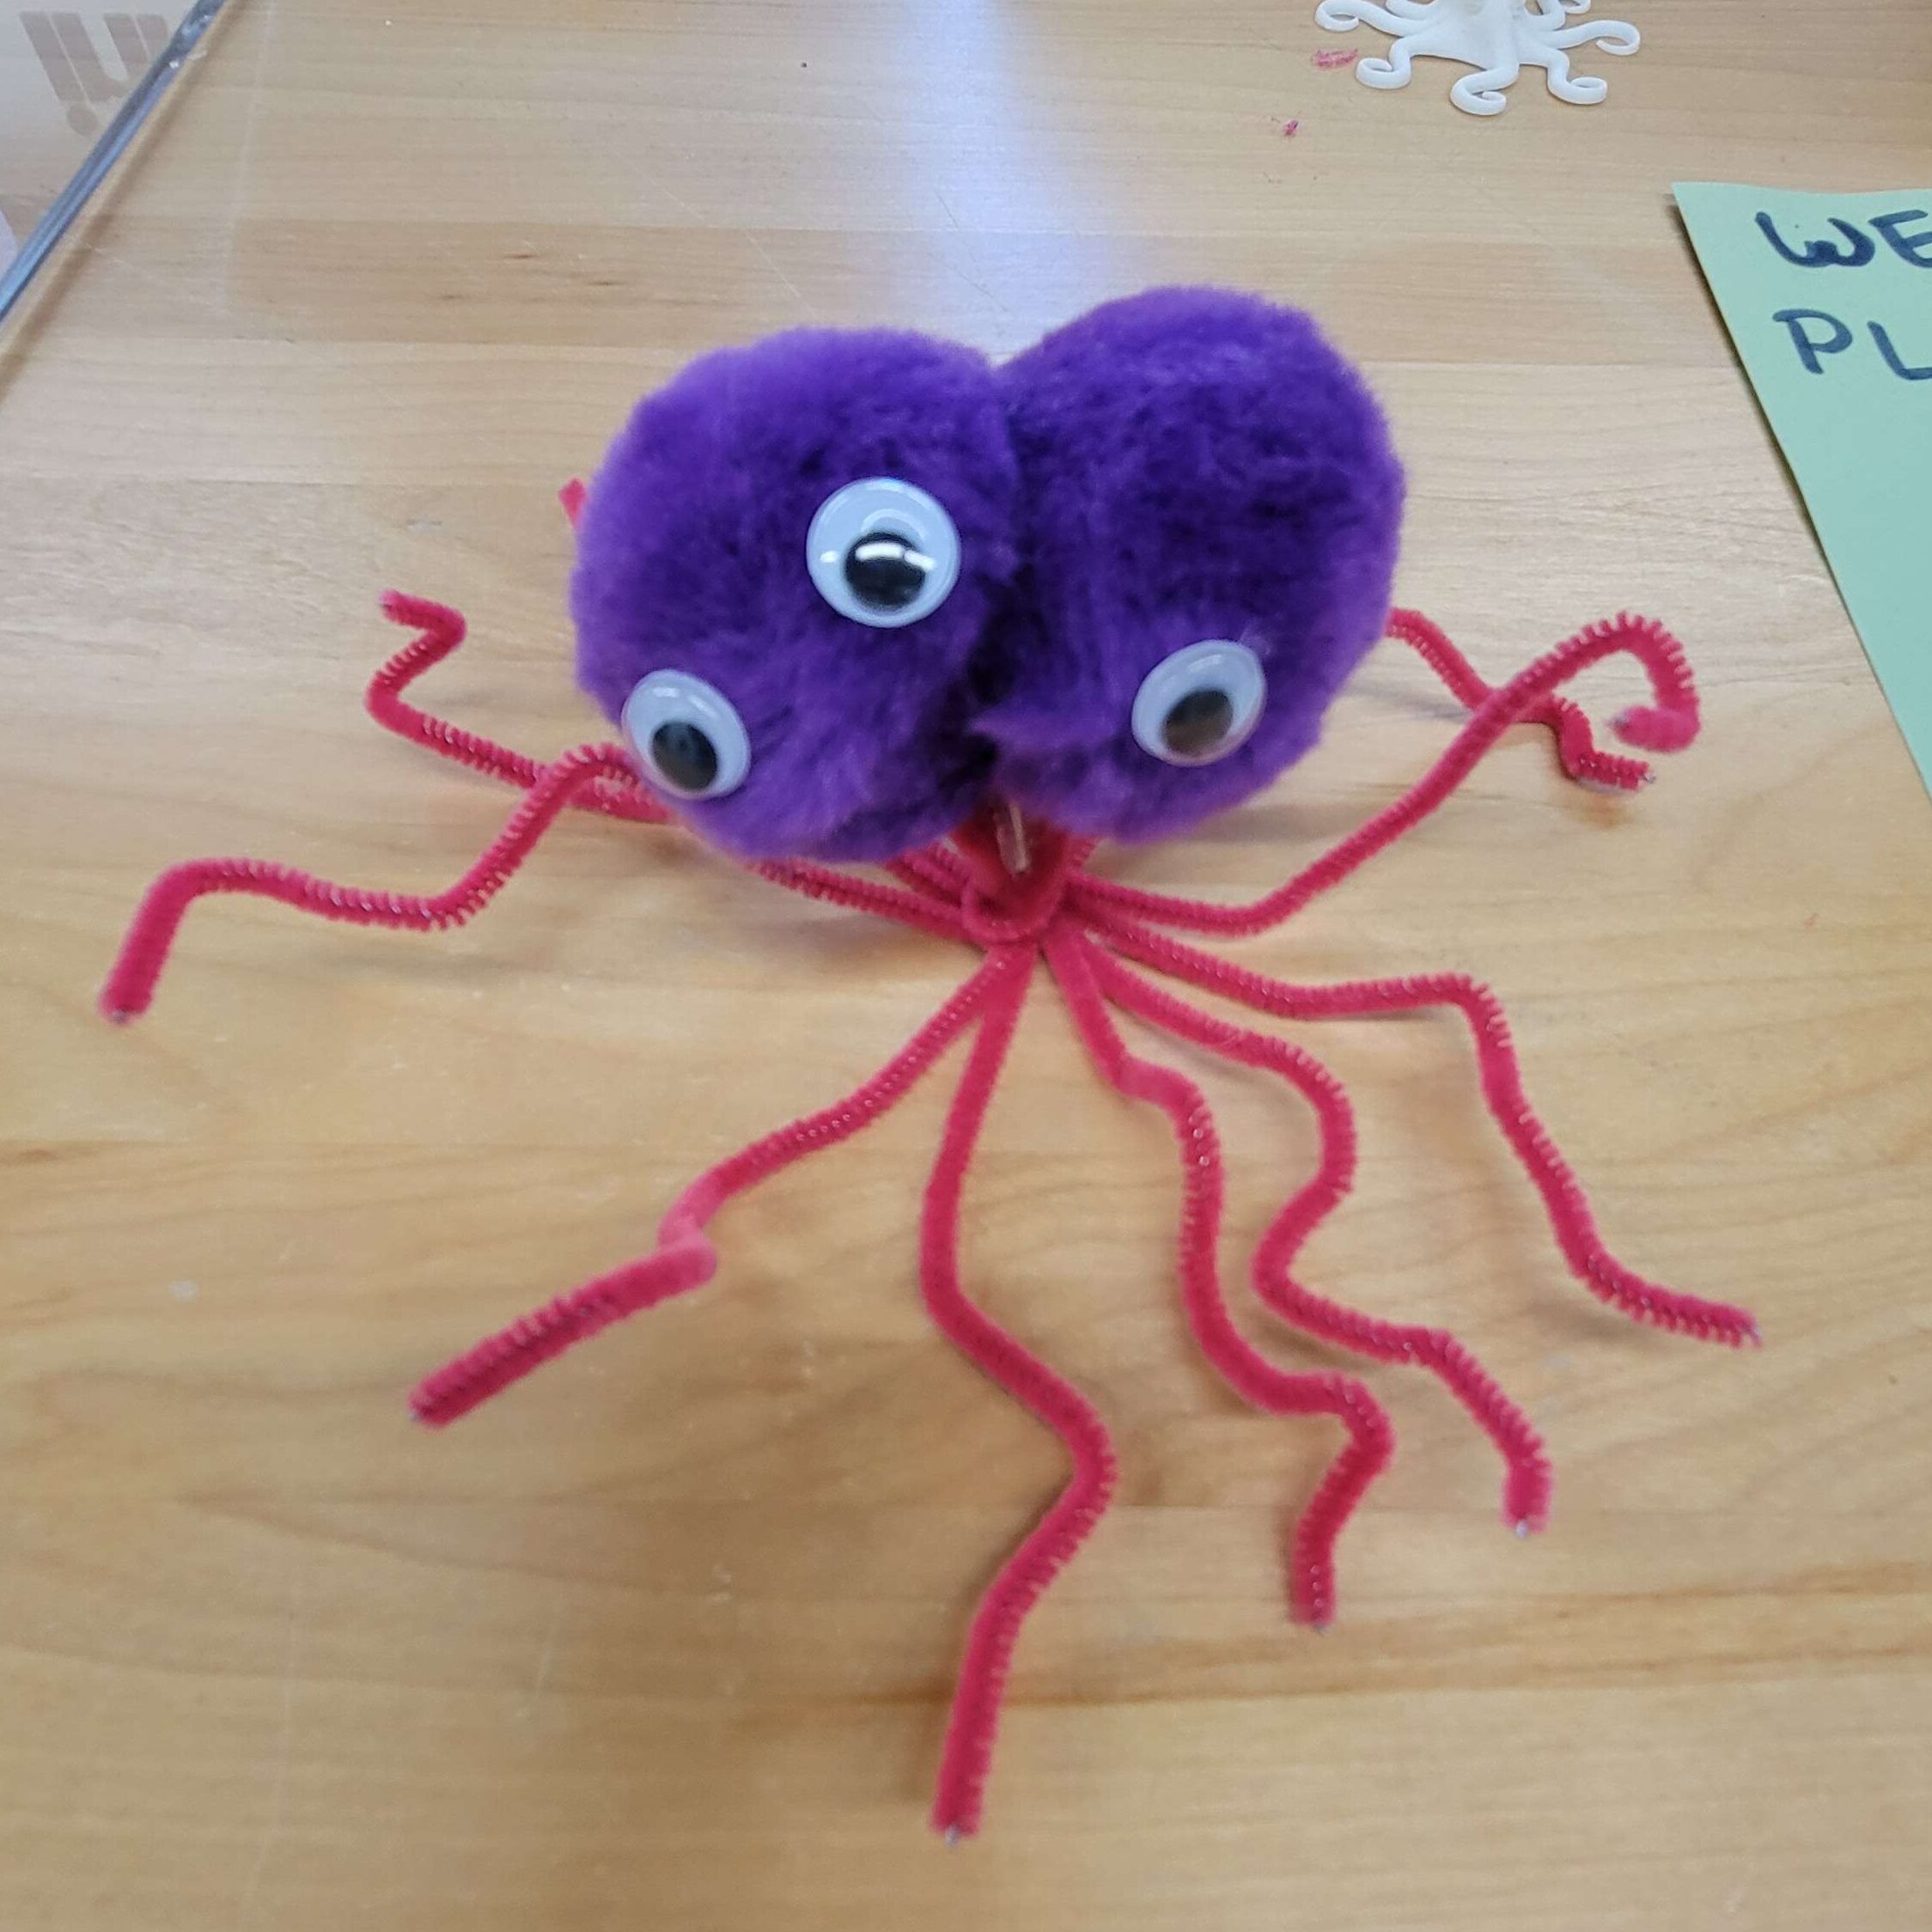 A two headed tentacled creature made out of purple pom poms, pink pipe cleaners, and three googly eyes.